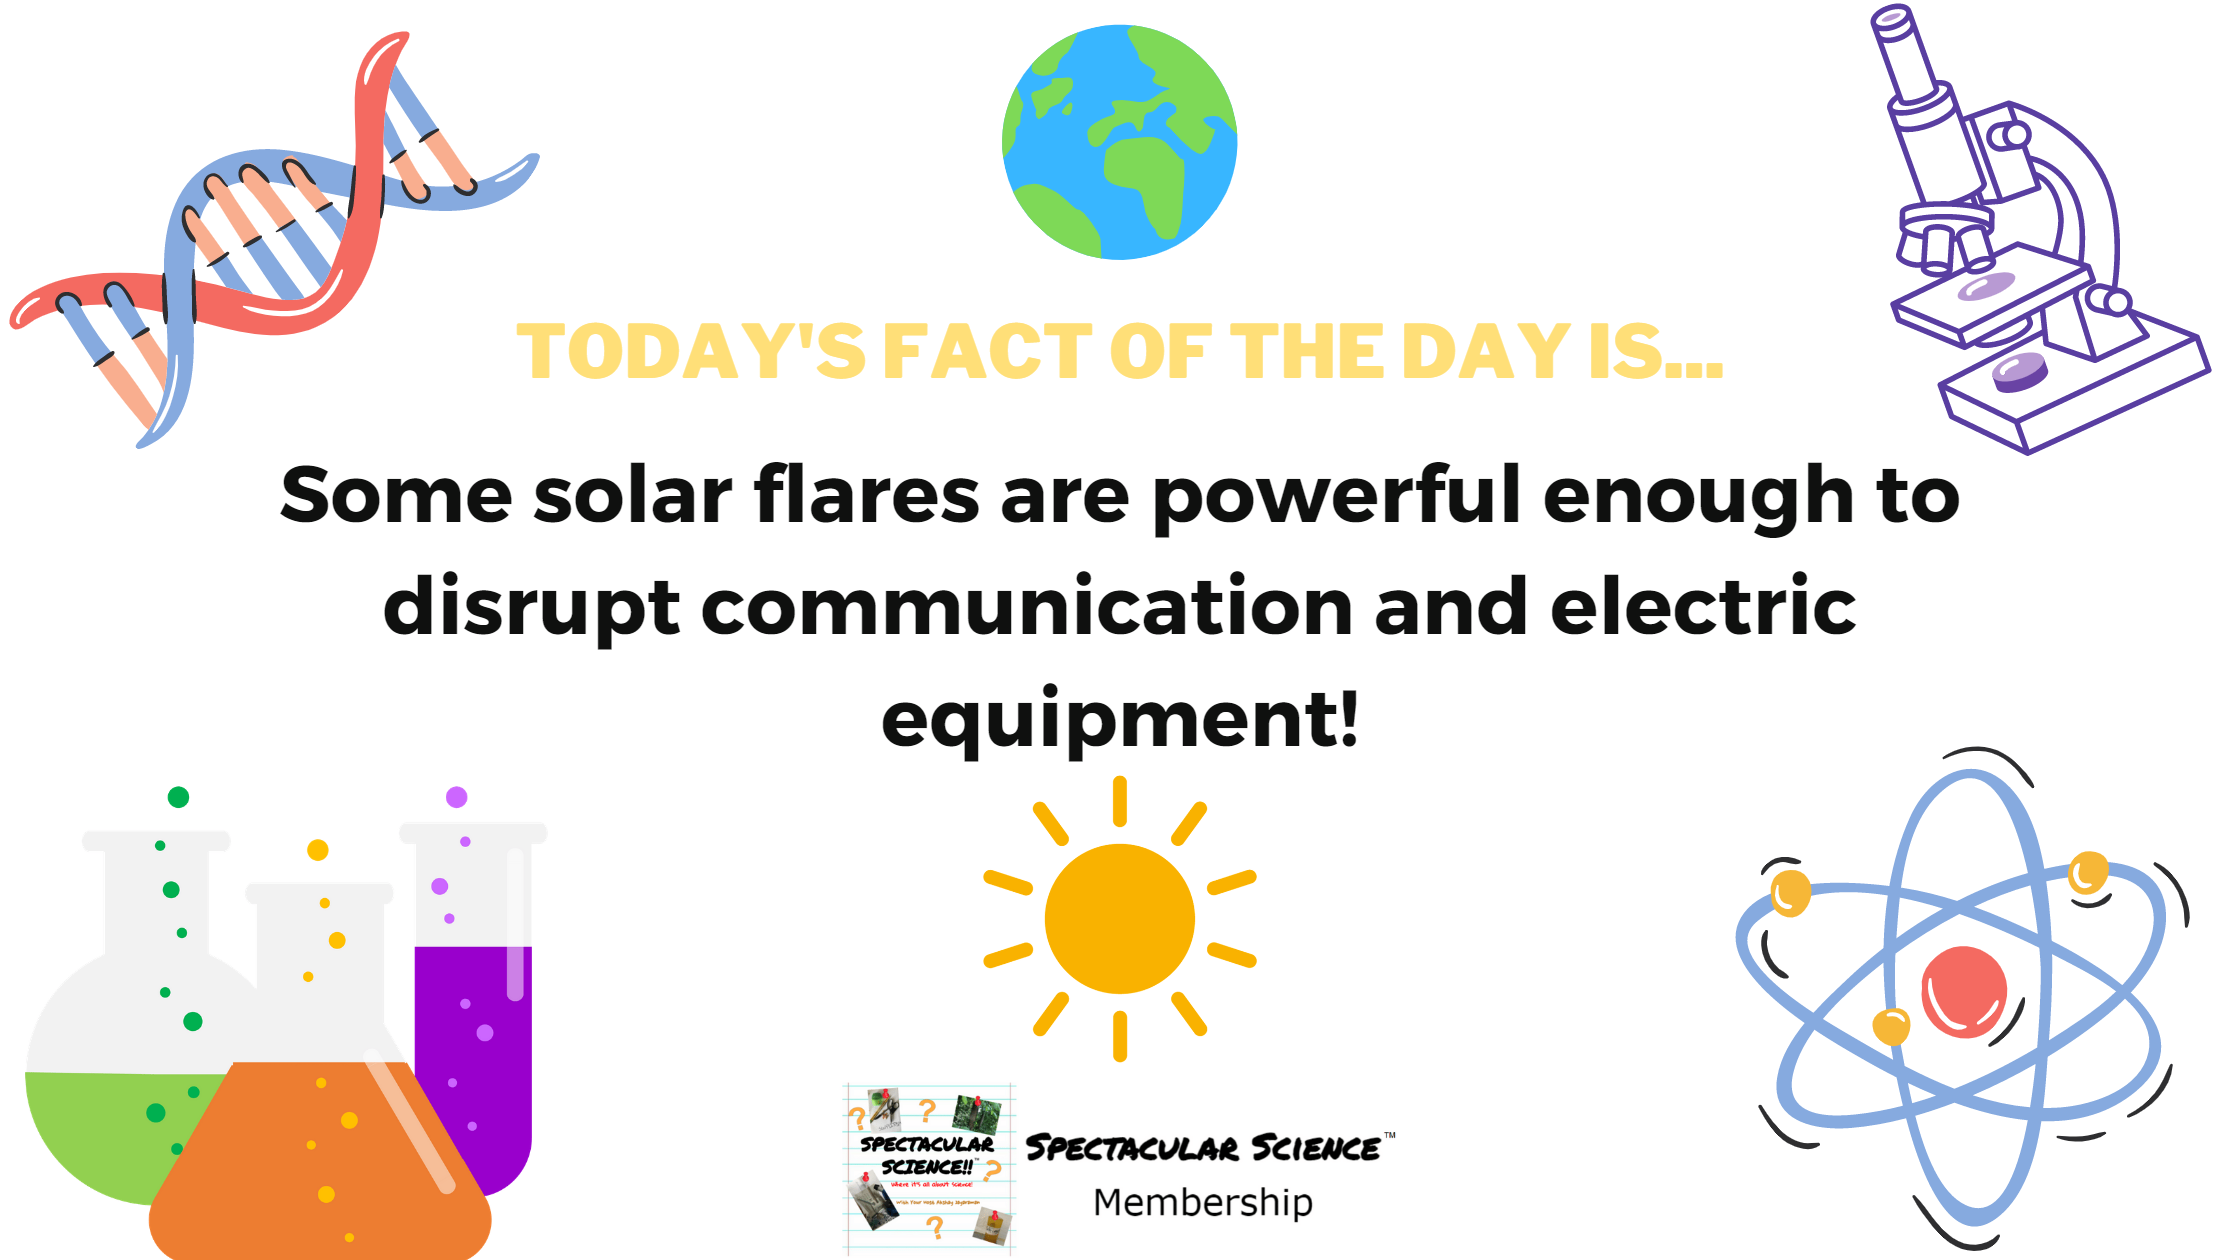 Fact of the Day Image November 21st